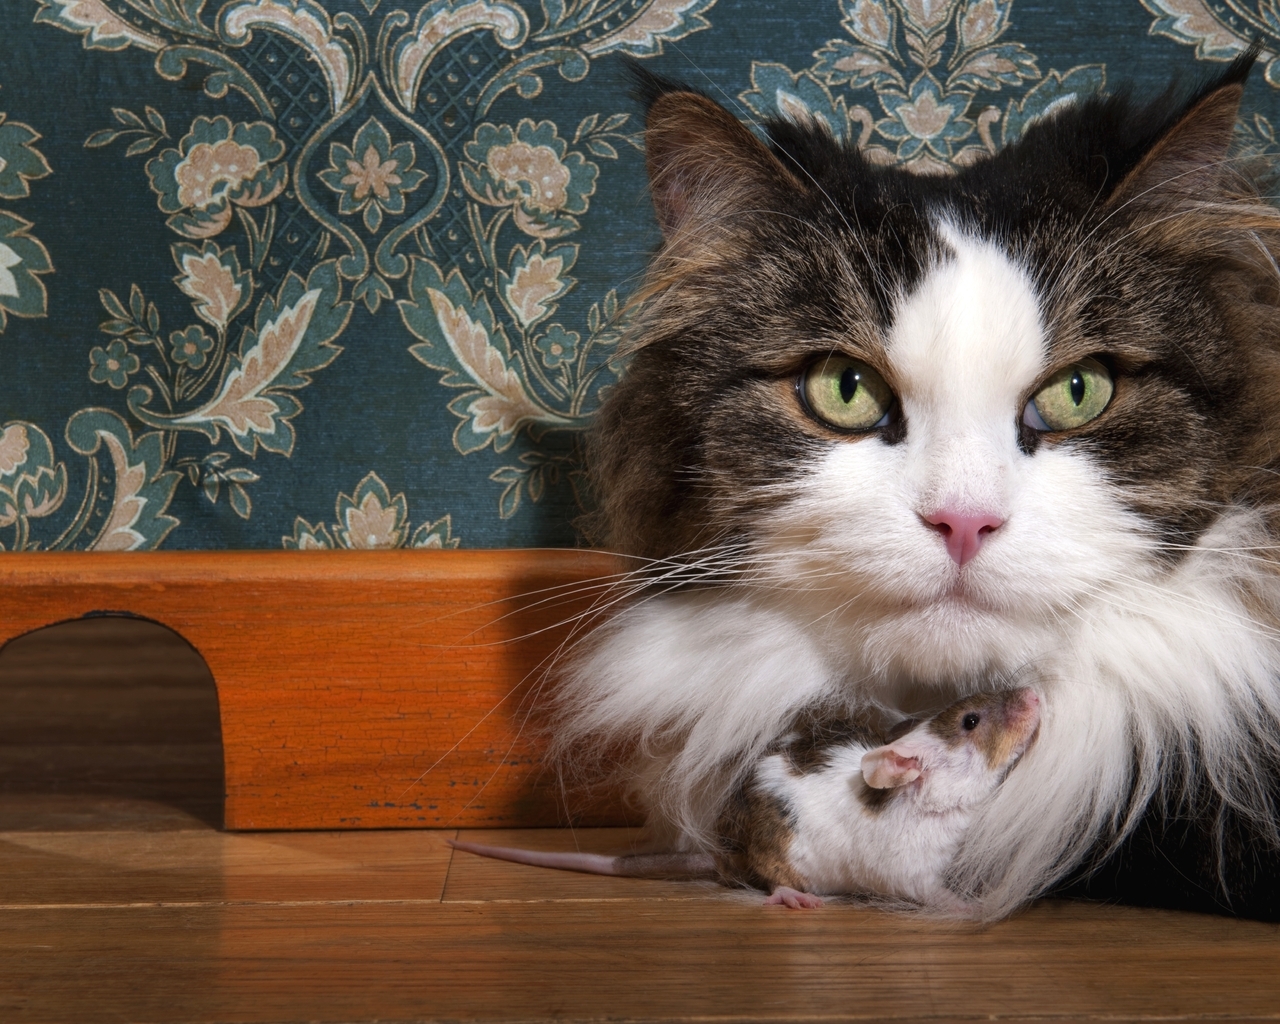 Image: Cat, fluffy, muzzle, mouse, two, sitting, mink, wall, pattern